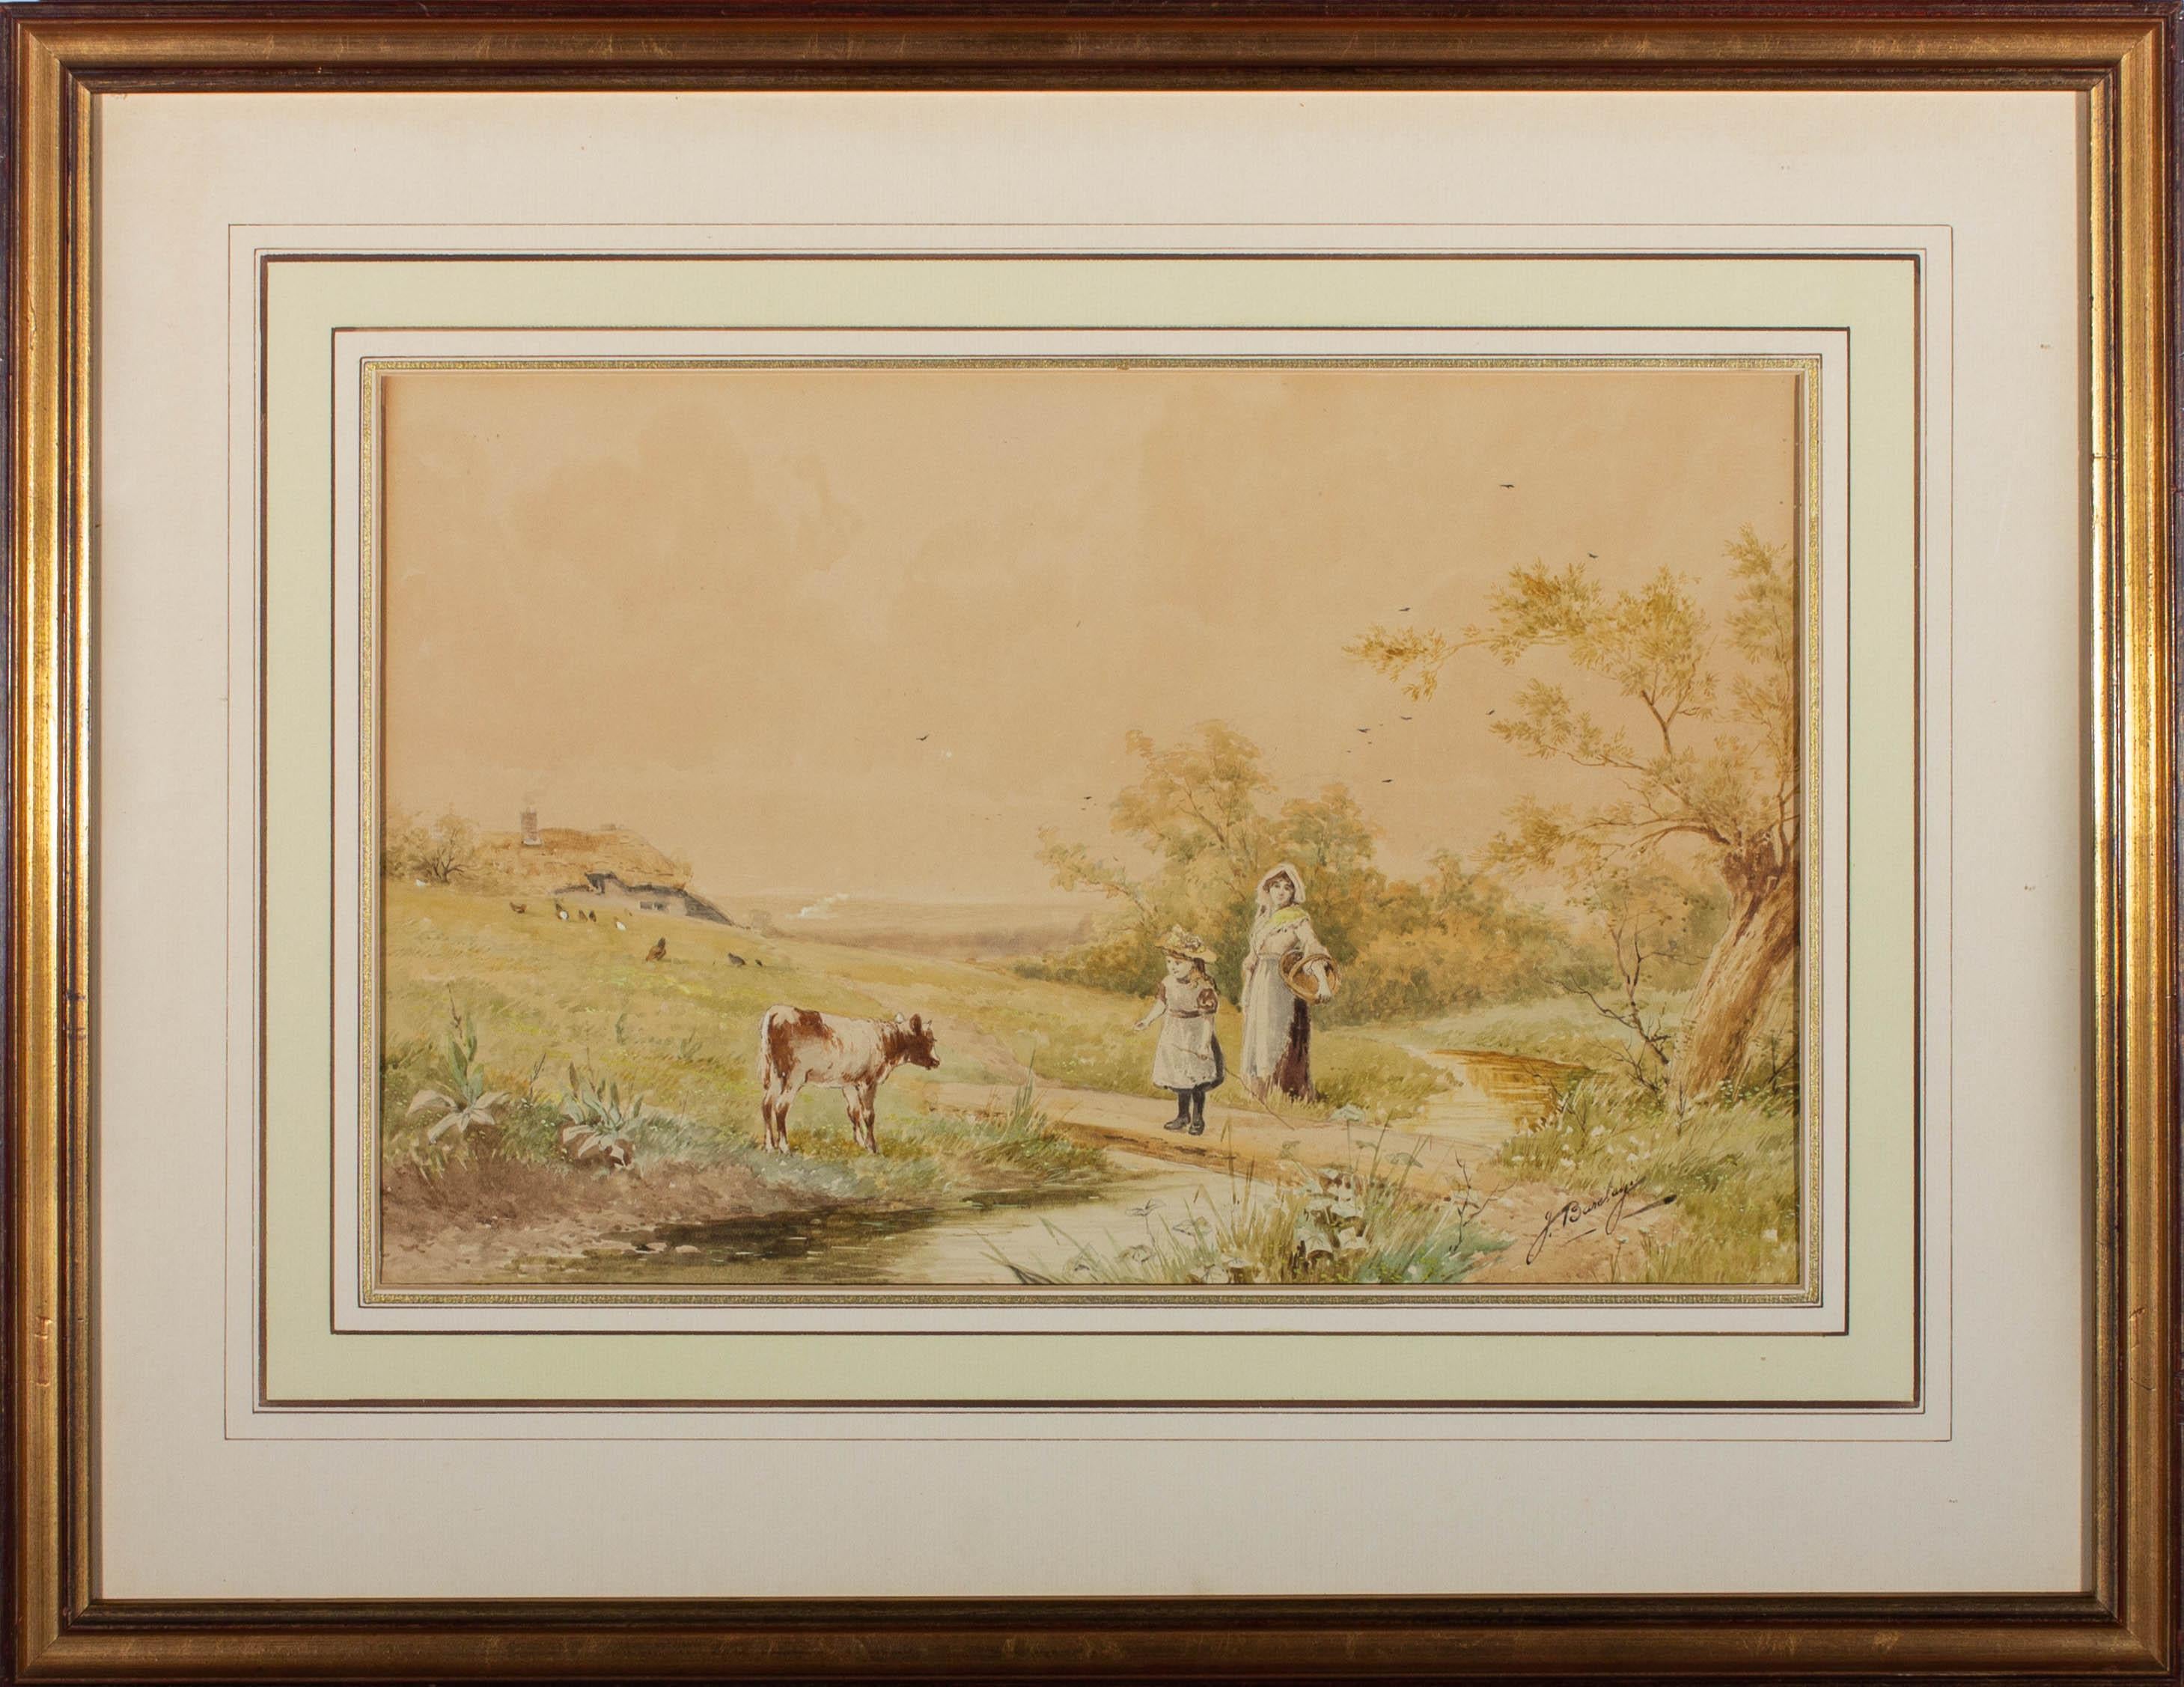 A delightful pastoral scene depicting a child beckoning a small calf towards her with a handful of food while her mother watches nearby. Signed to the lower right. Well presented in a gilt effect frame. On wove.
